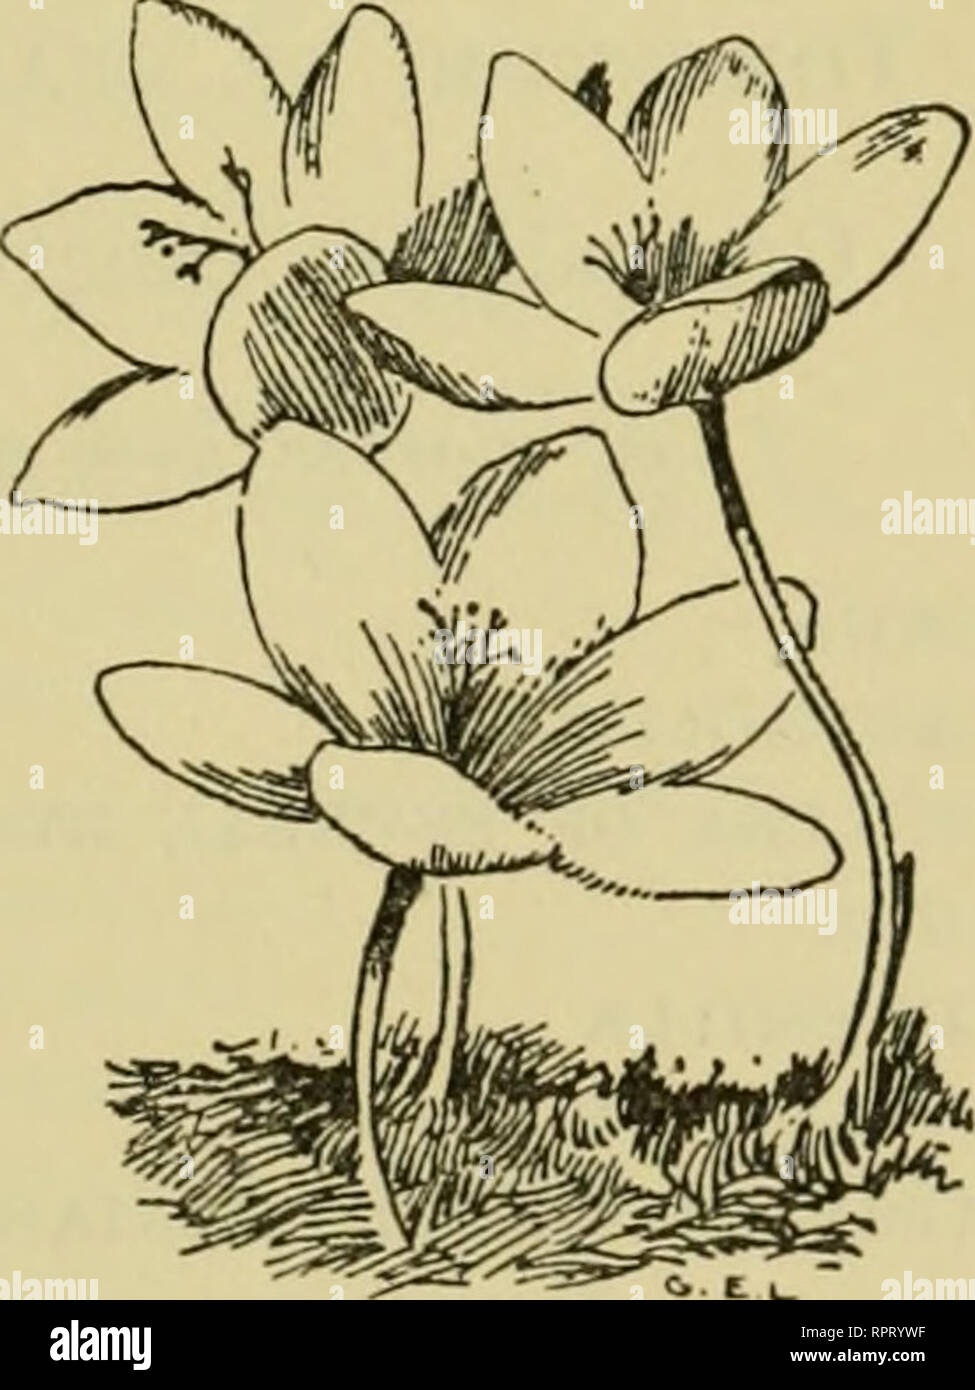 . Alpine plants. Mountain plants; Rock gardens. PLANTS FOR VARIOUS PURPOSES 193 A Few of the Earliest and most Effective of Spring Flowering Rock Plants. [Where the generic name alone is given it may be assumed that a number of the species and varieties bear the characteristics indicated.] Adonis Anemone Arab IS As PERULA aubrietia Auricula Cardamine Cheiranthus alpinus Convallaria majalis corydalis Draba Dryas octopetala Epimedium Erica mediterranea NICA Genista tinctoria Gentiana acaulis Hacquetia epipactis Iberis sempervirens Iris reticulata and others Macrotomia echiodes MORISIA hypogcea p Stock Photo